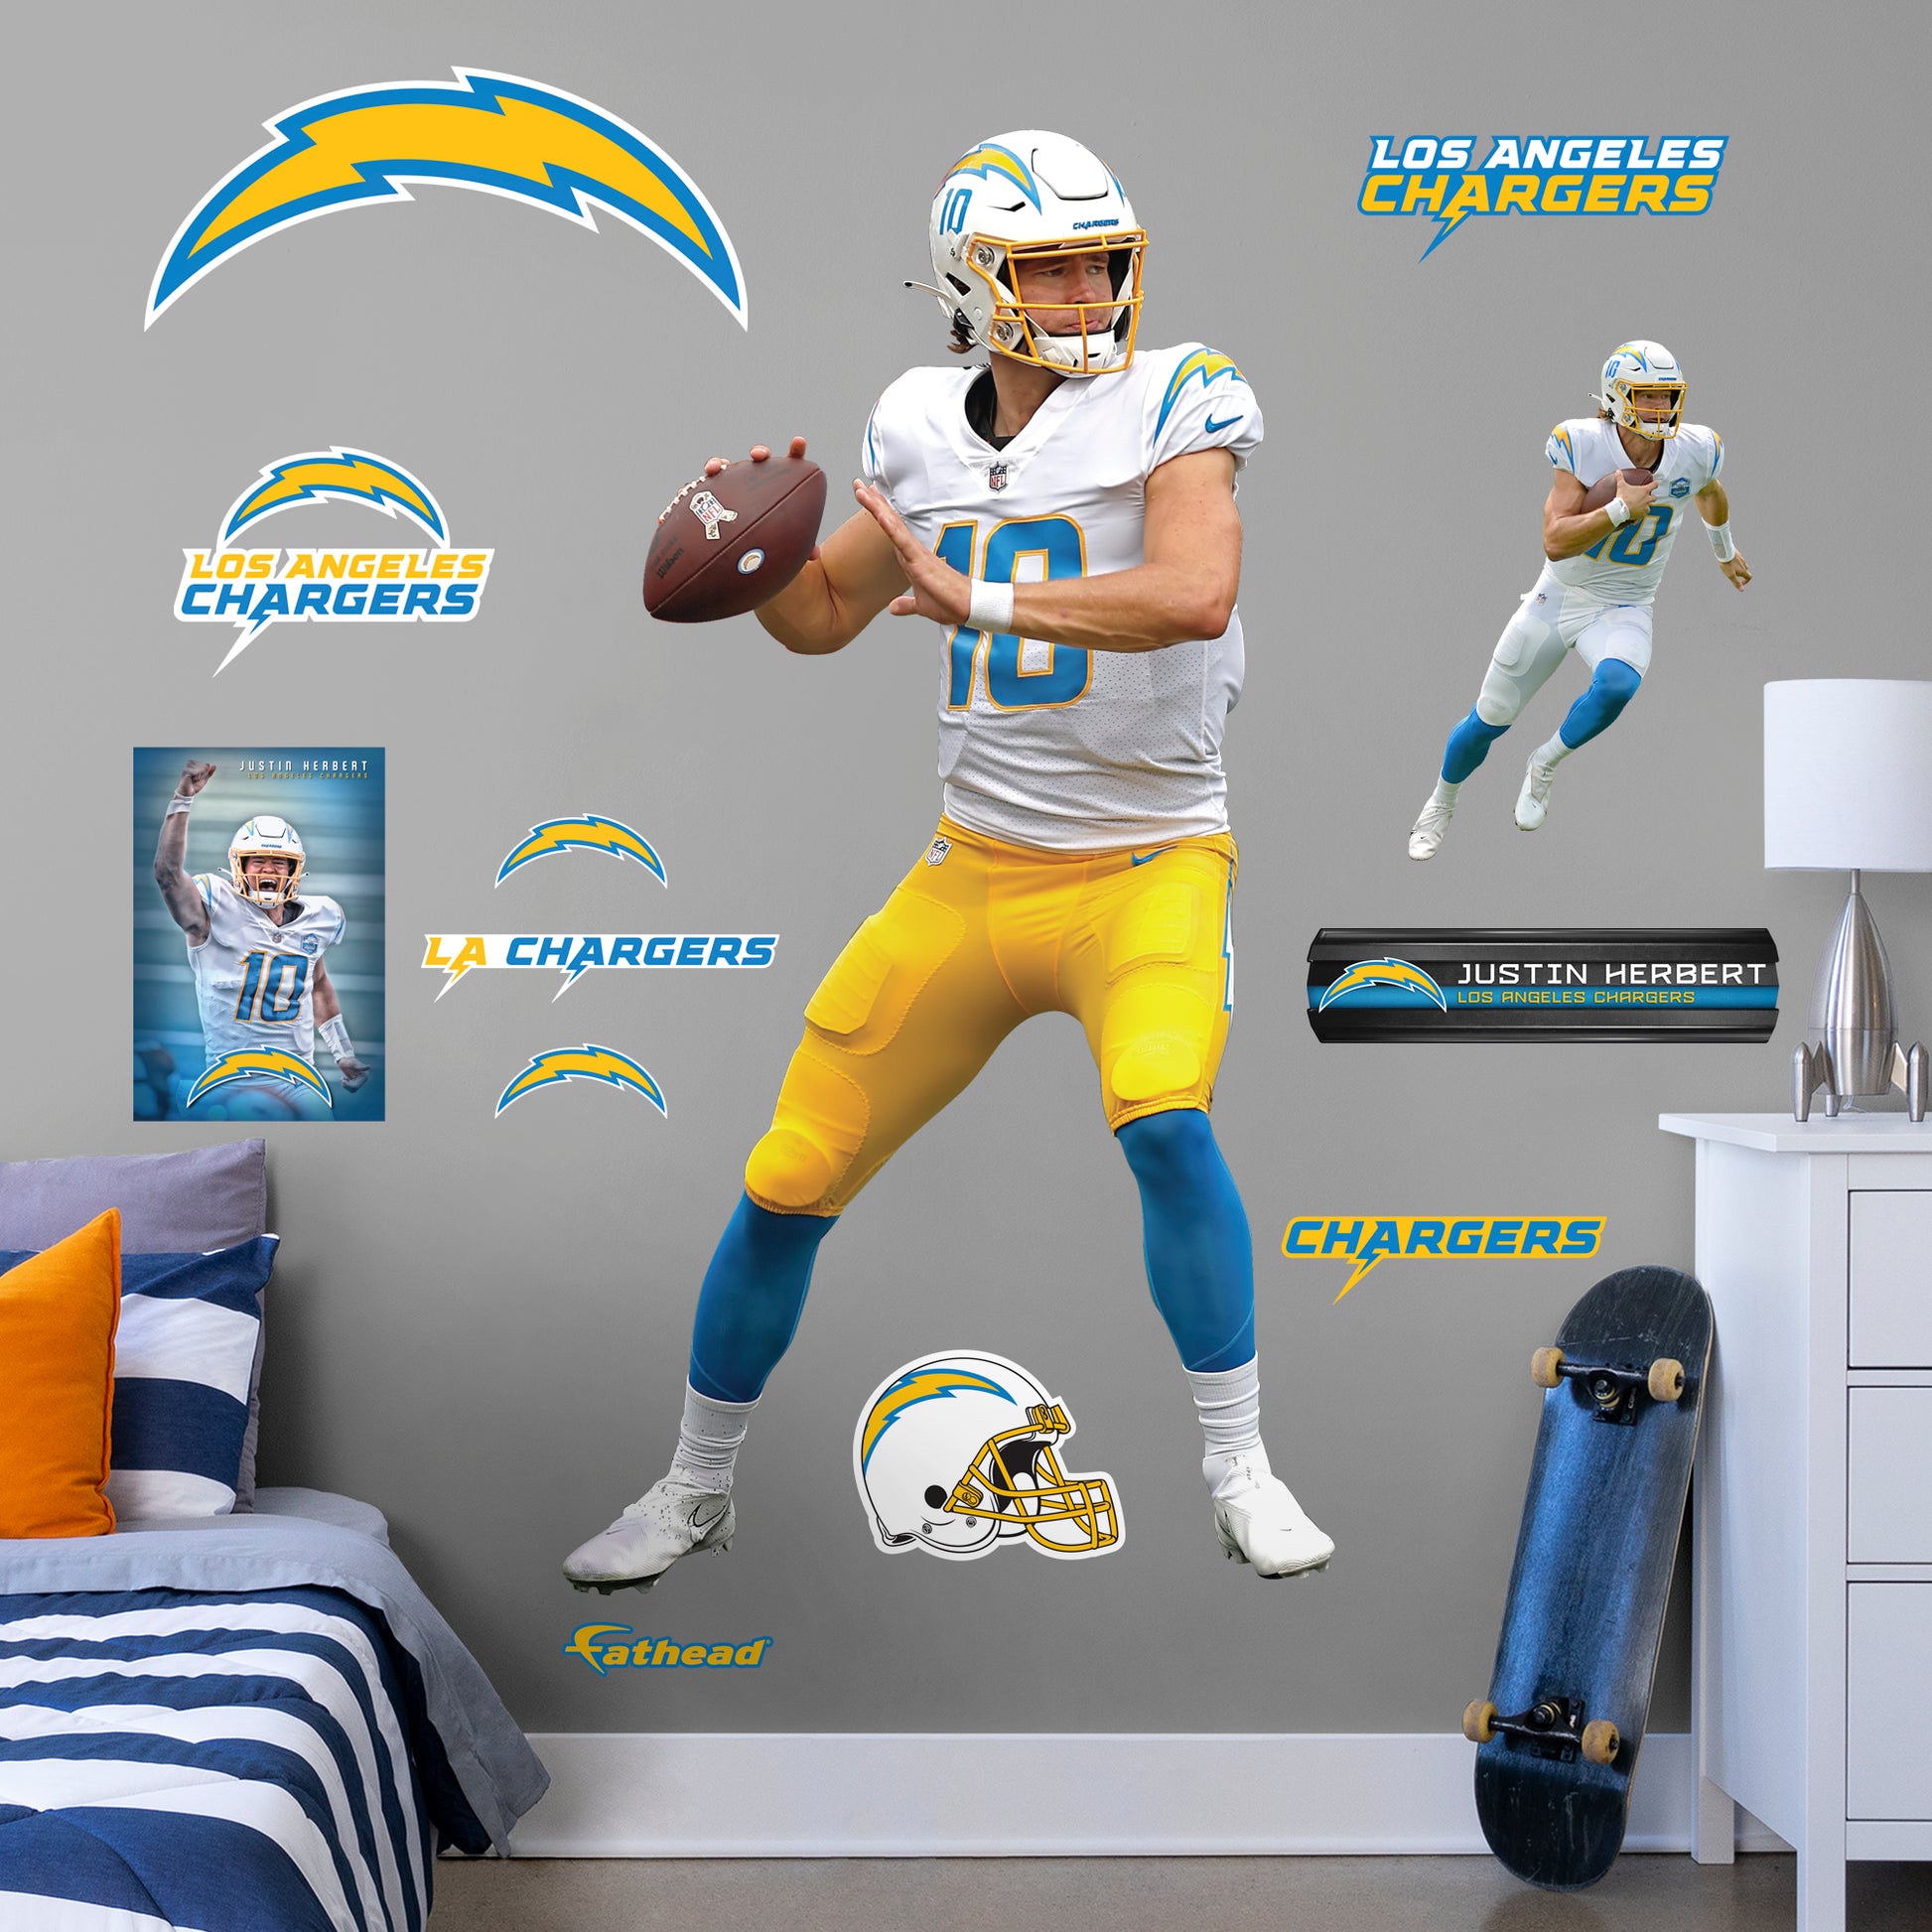 Life-Size Athlete + 11 Decals Bring the action of the NFL into your home with a wall decal of Justin Herbert! High quality, durable, and tear resistant, you'll be able to stick and move it as many times as you want to create the ultimate football experience in any room!